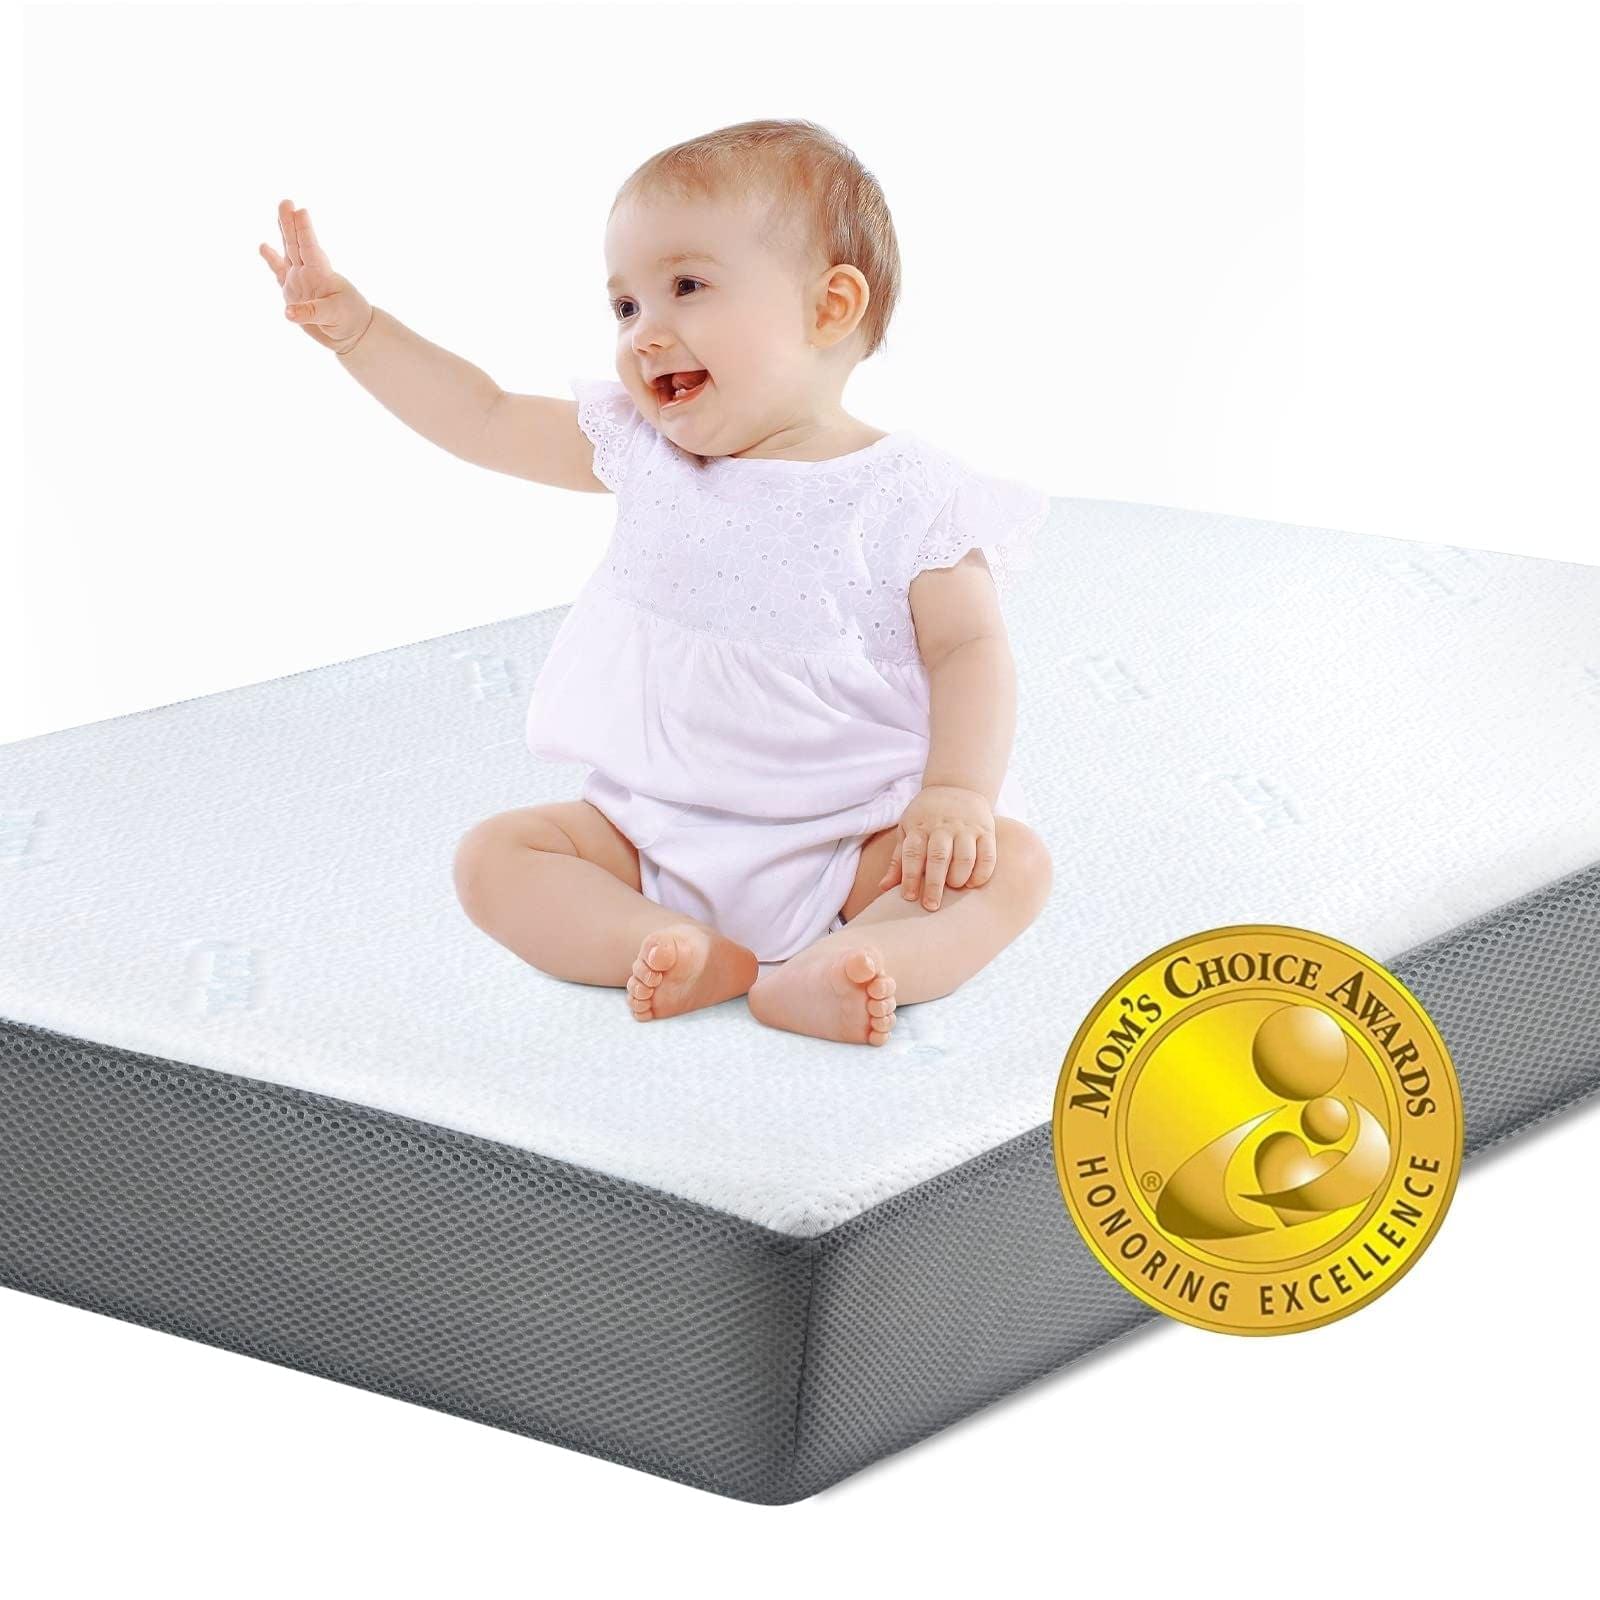 Babelio Cloud 2 Crib & Toddler Mattress with Tencel Cover – Dual-Sided  Memory Foam, CertiPUR-US Certified, Breathable Design